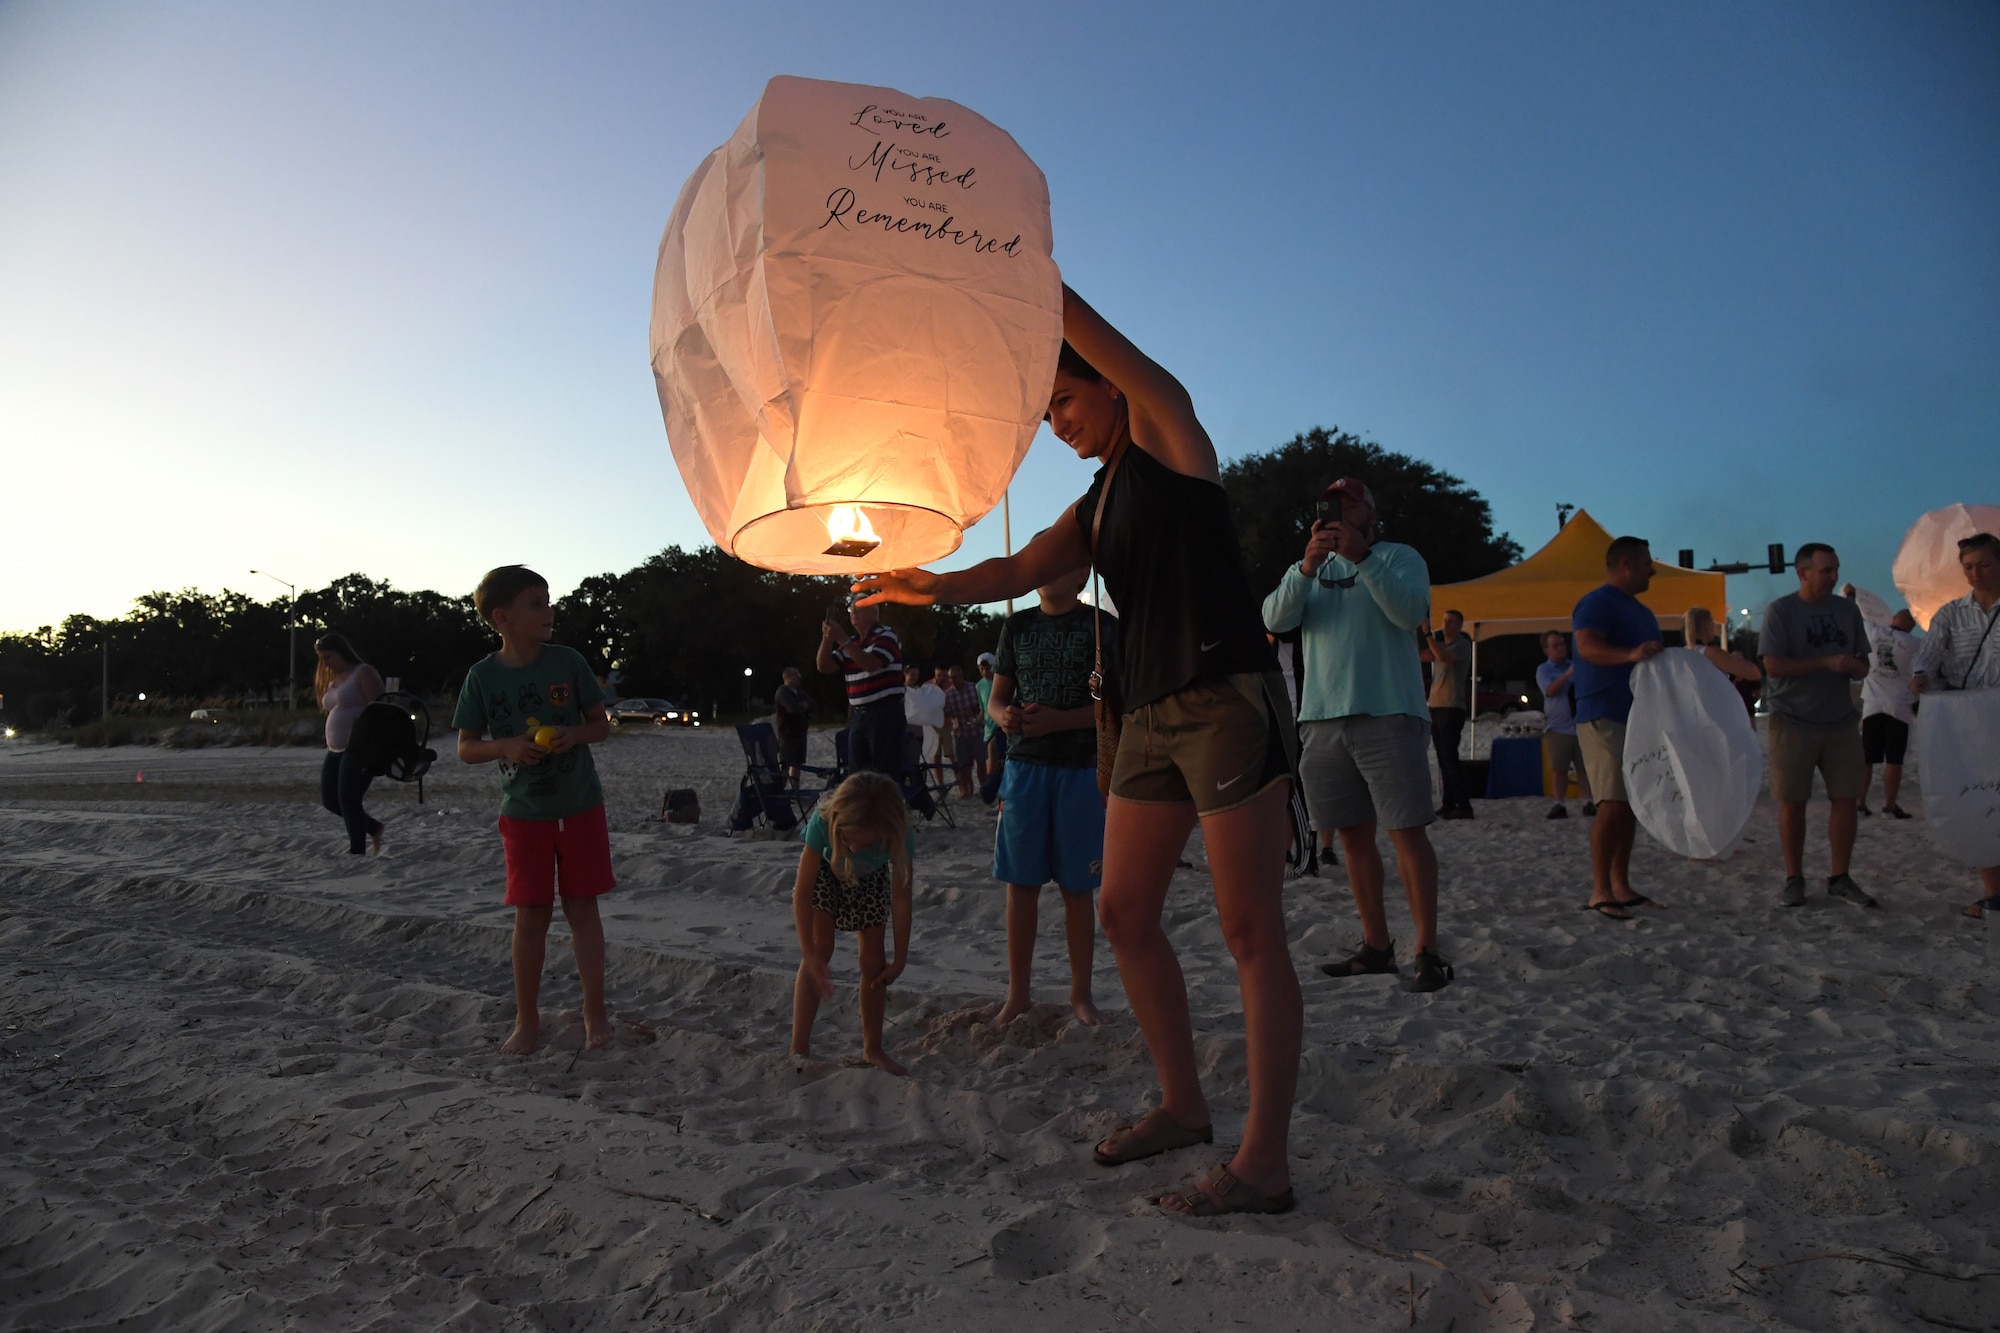 U.S. Air Force Capt. Heather Prentice, 81st Operational Medical Readiness Squadron mental health provider, prepares to release a lantern during the Air Force Families Forever Fallen Hero Sky Lantern Lighting on the Biloxi Beach, Mississippi, Sept. 24, 2021. The event, hosted by Keesler Air Force Base, included eco-friendly sky lanterns released in honor of fallen heroes. (U.S. Air Force photo by Kemberly Groue)